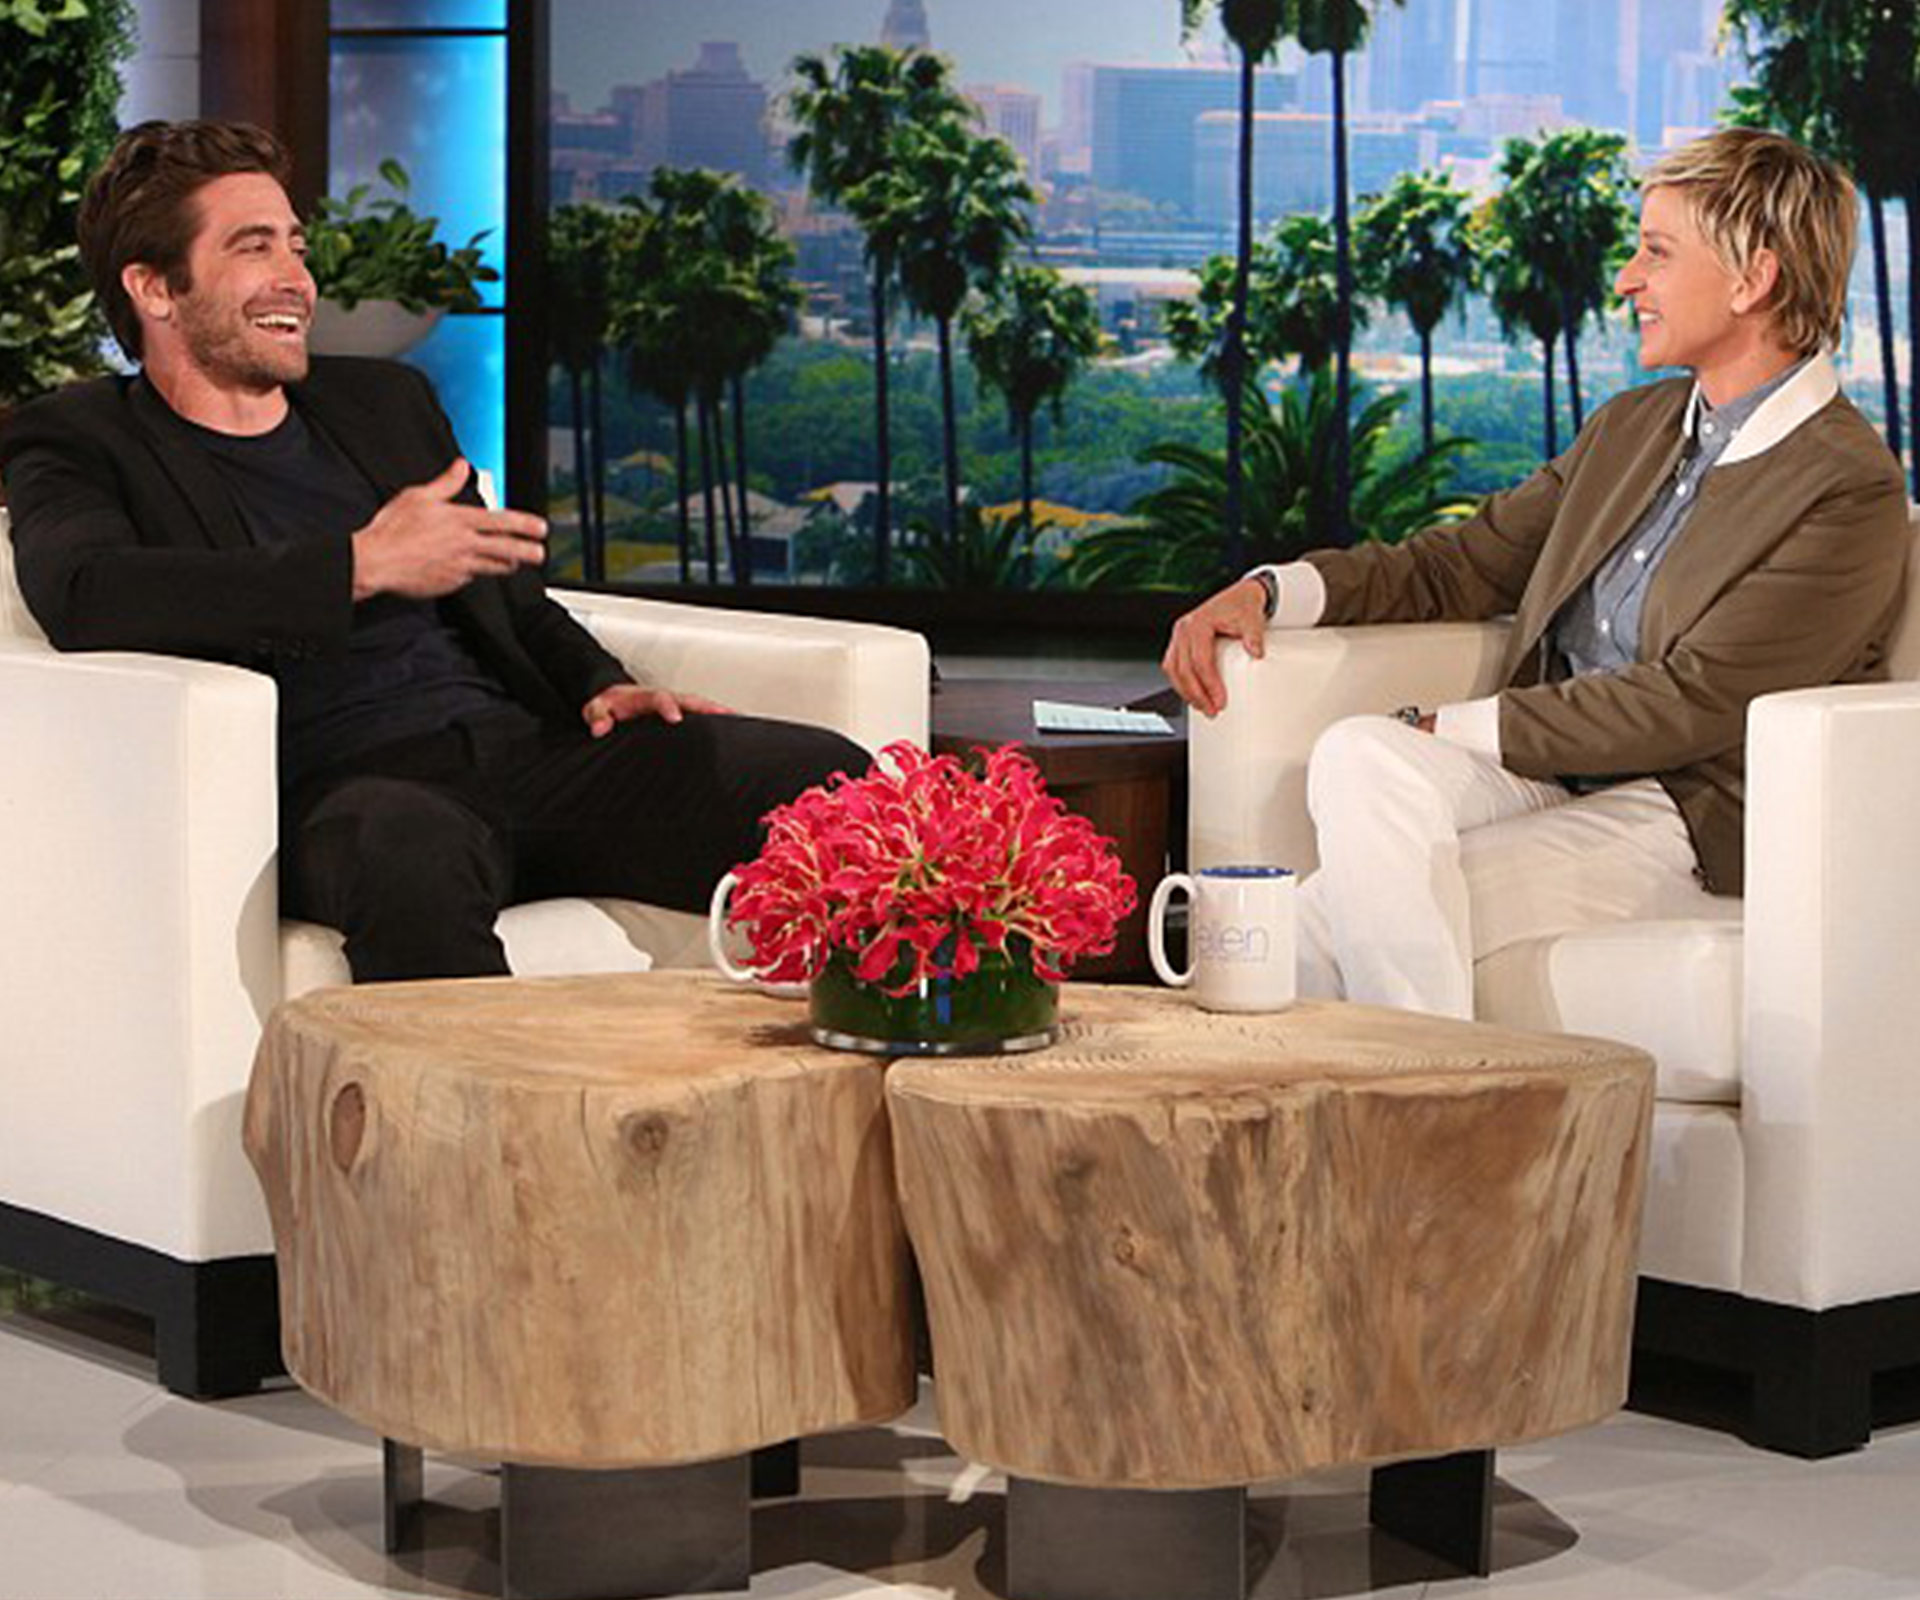 Want to date Jake Gyllenhaal? First dates are always at his mum’s place!